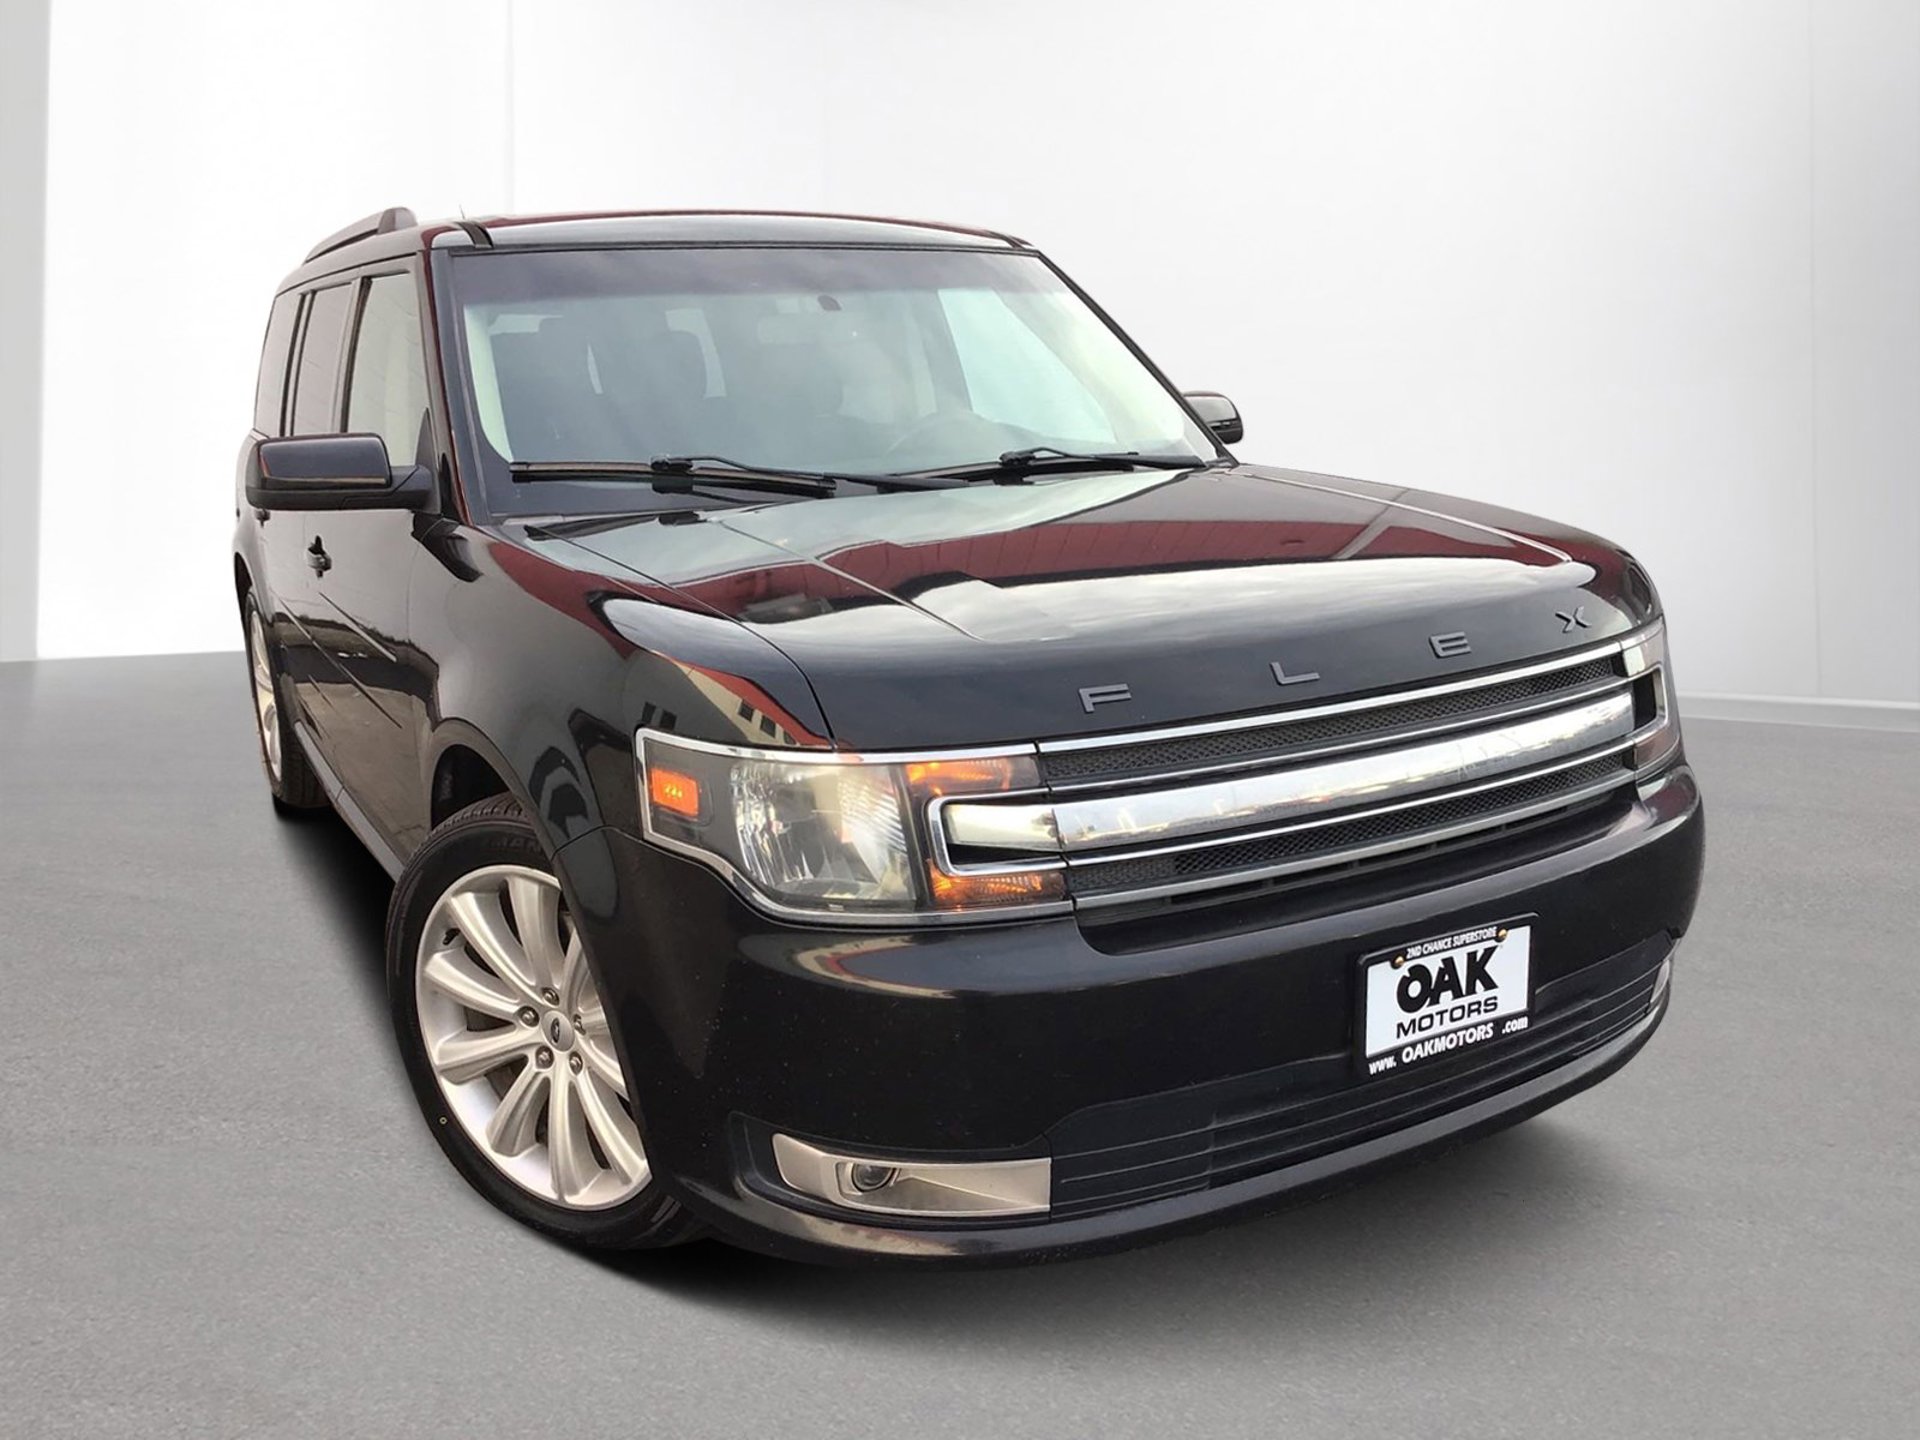 Used Ford Flex For Sale in Indianapolis, IN | Oak Motors